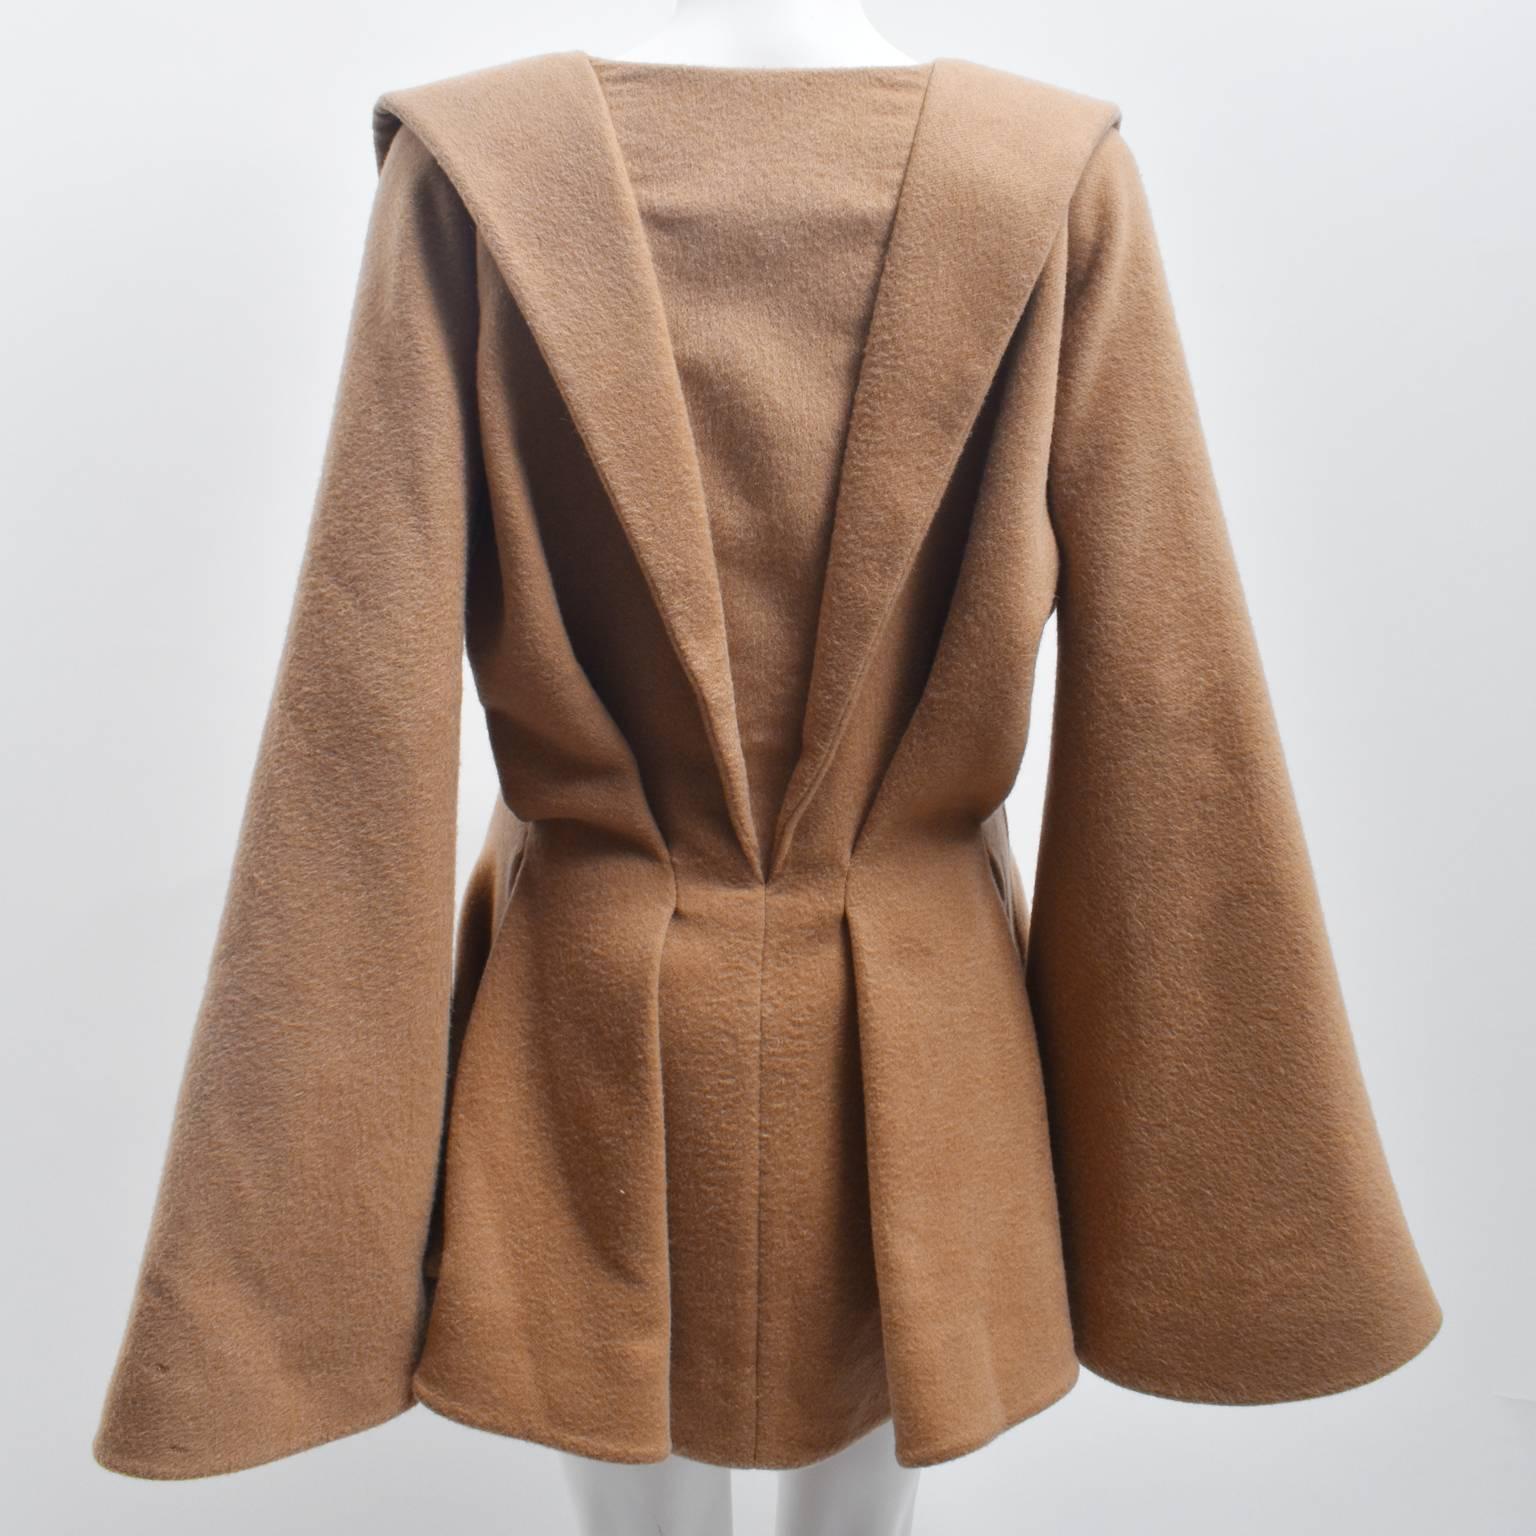 Alexander McQueen Camel Cashmere Coat with Connected Bell Sleeves 1